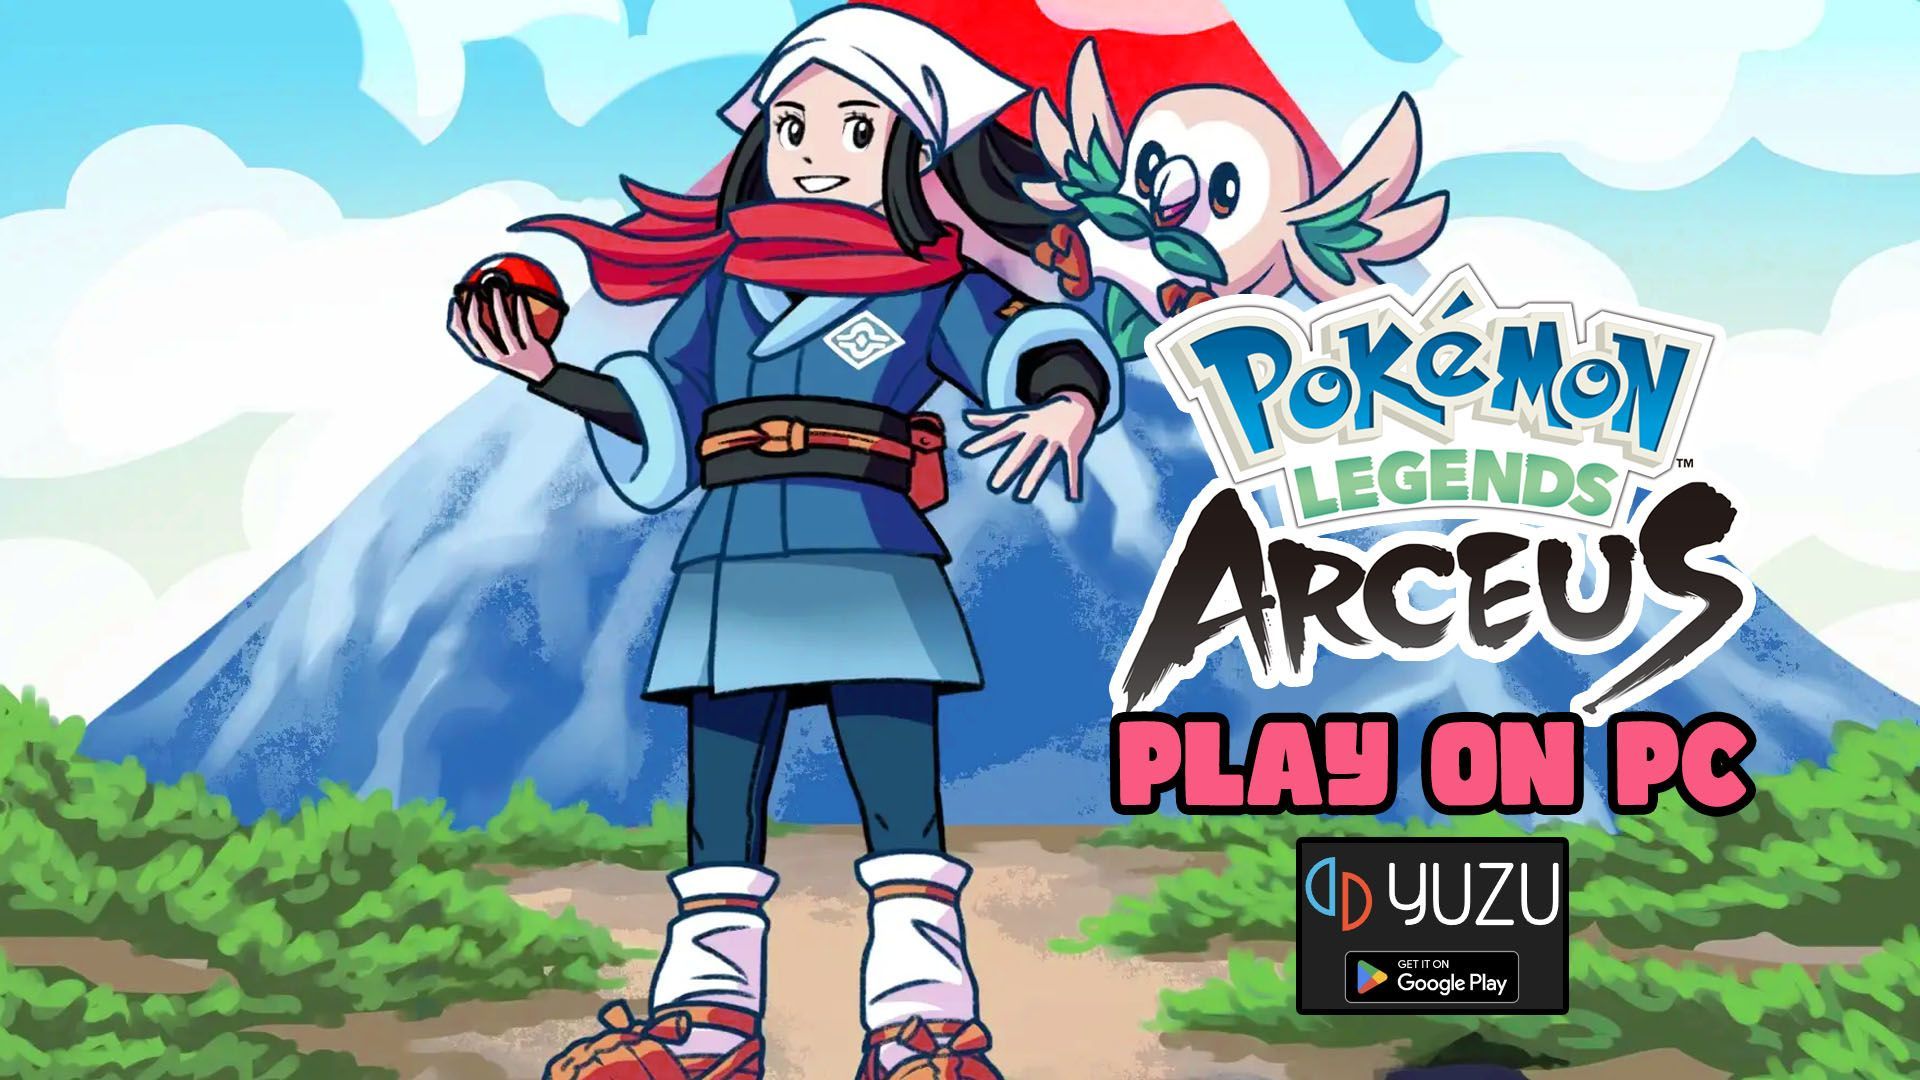 Can you play Pokemon Legends: Arceus on PC?